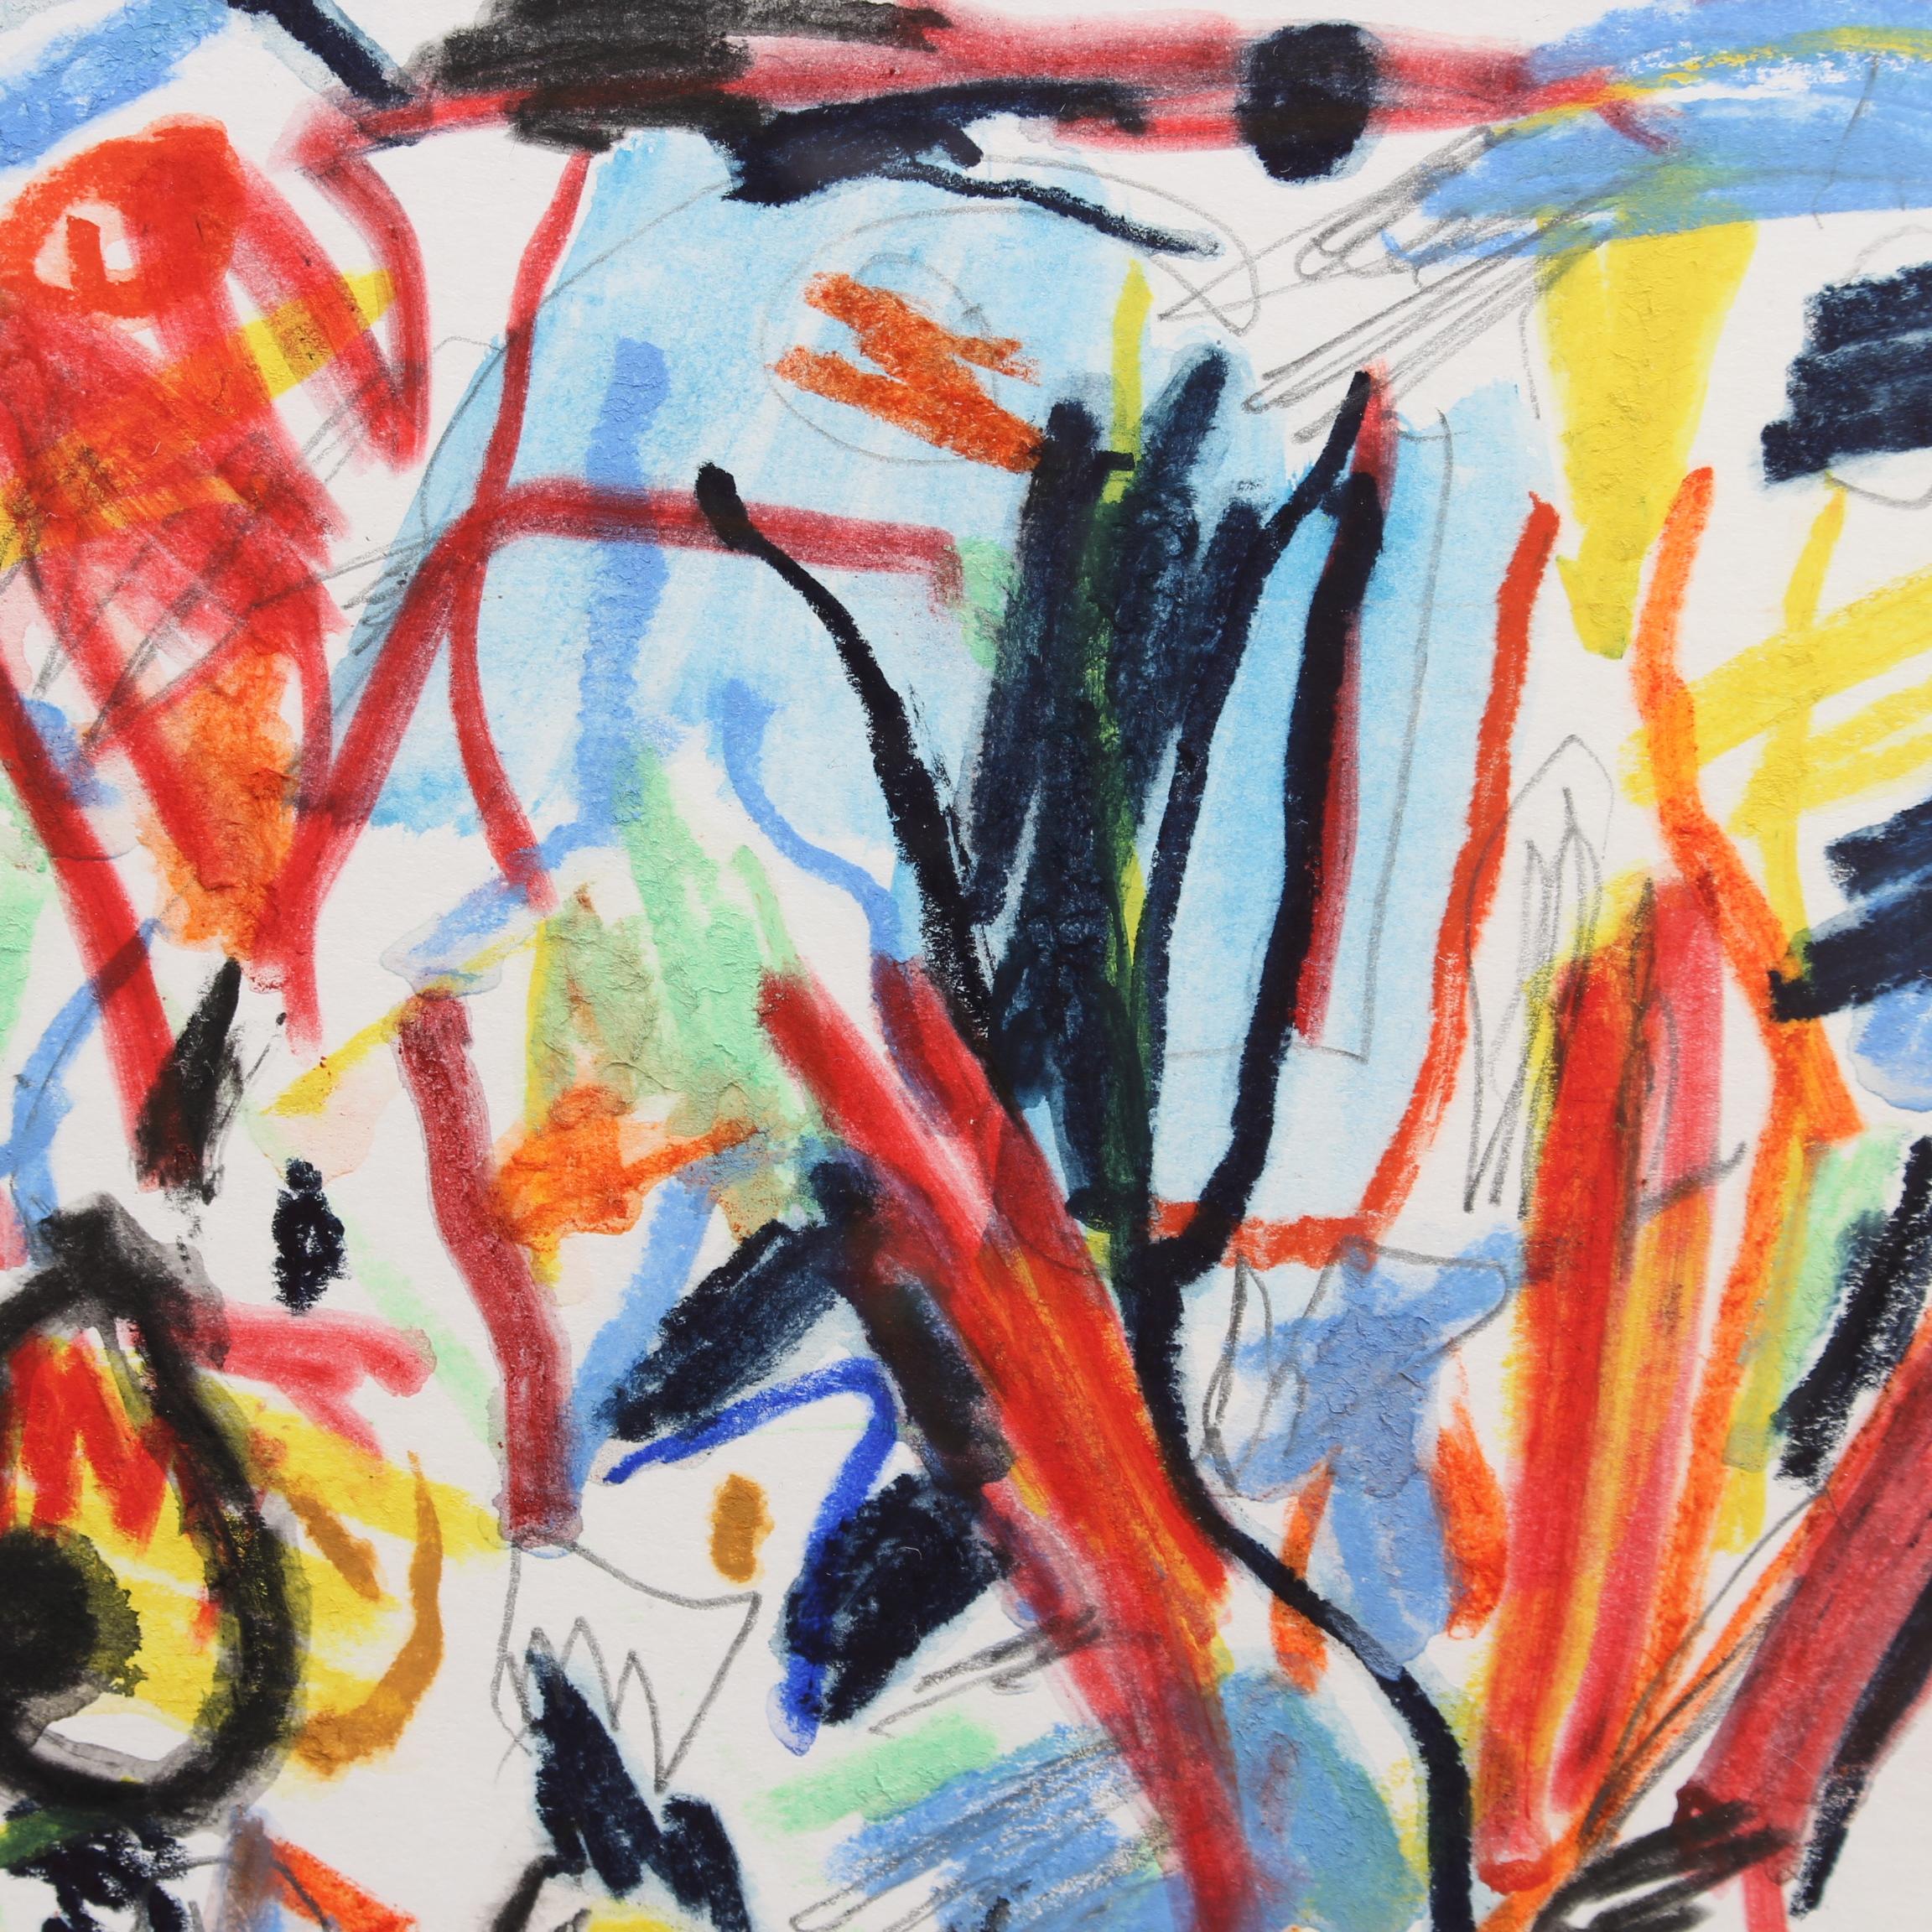 'Dinosaur Me & Baby' abstract composition, mixed media on soft board, Japanese ink, oil, pencil and gouache by Erez Yardeni (2018). The scribblings of a child and the creative meanderings of an artist reside behind the frame's glass. The viewer may